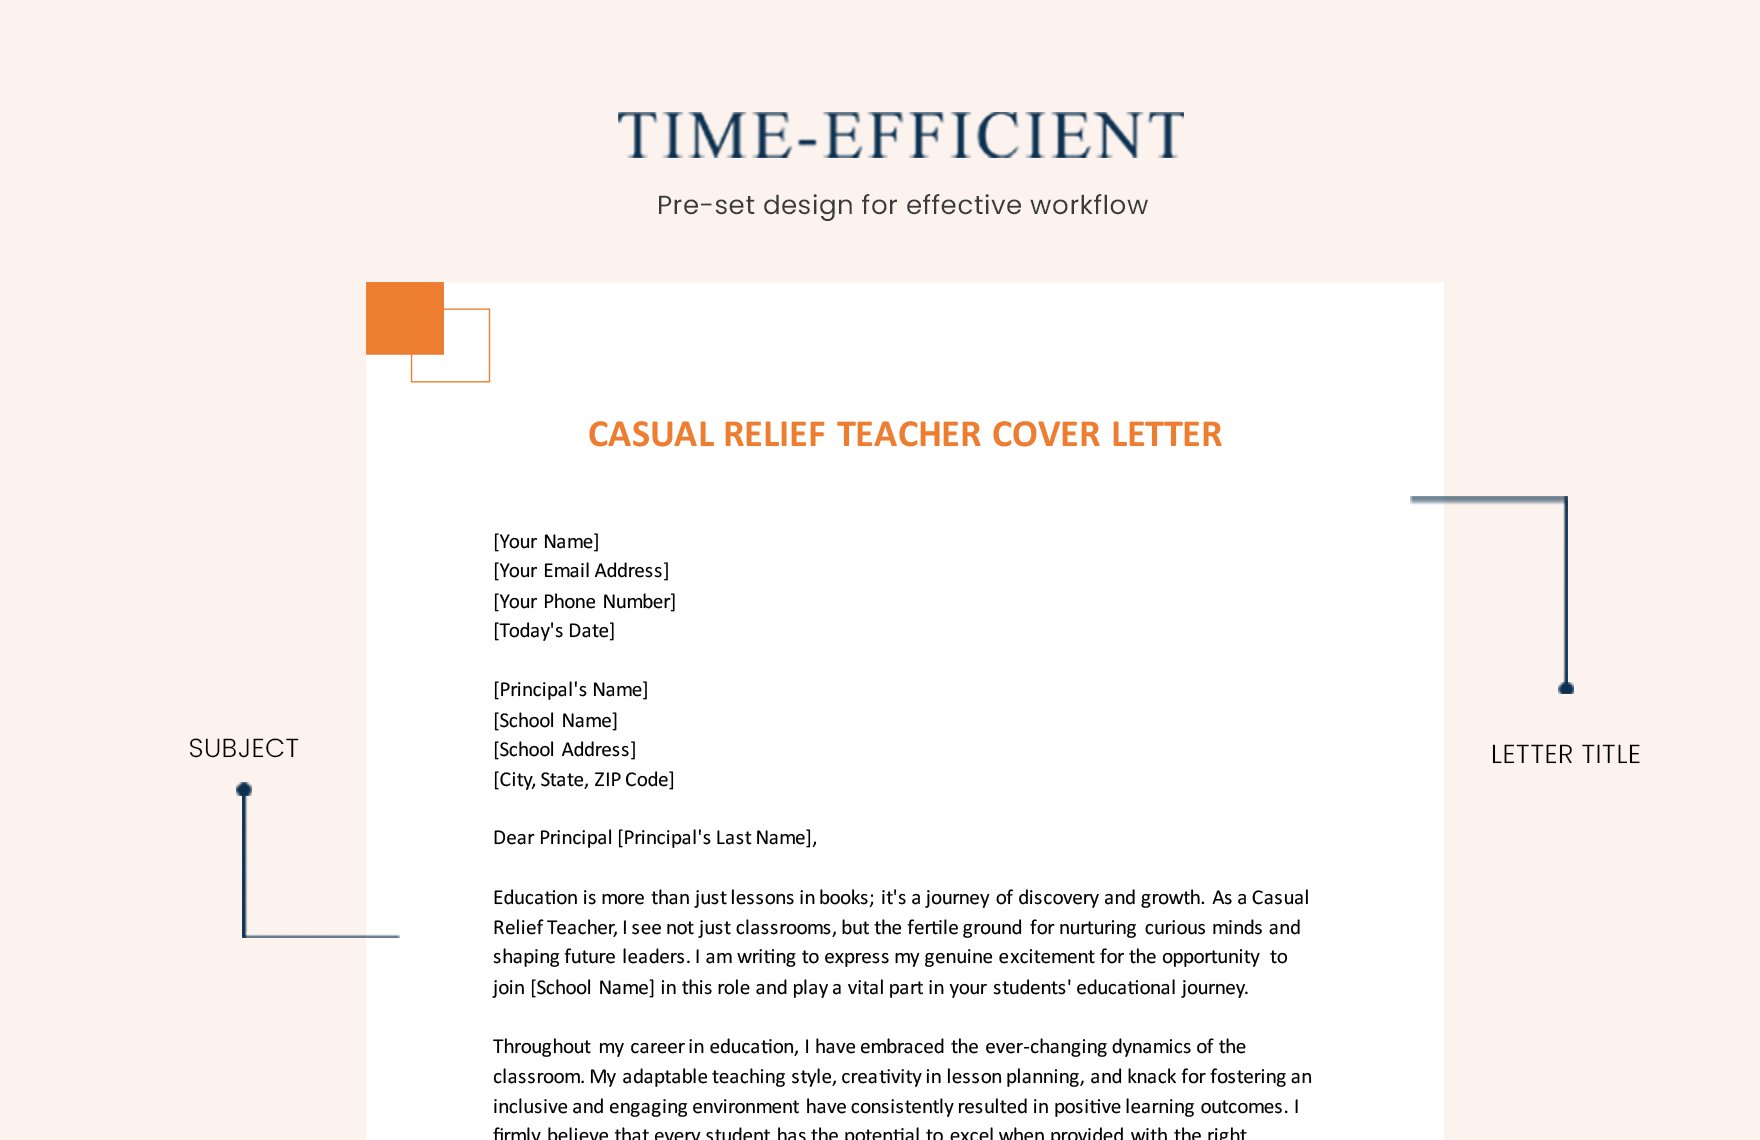 Casual Relief Teacher Cover Letter